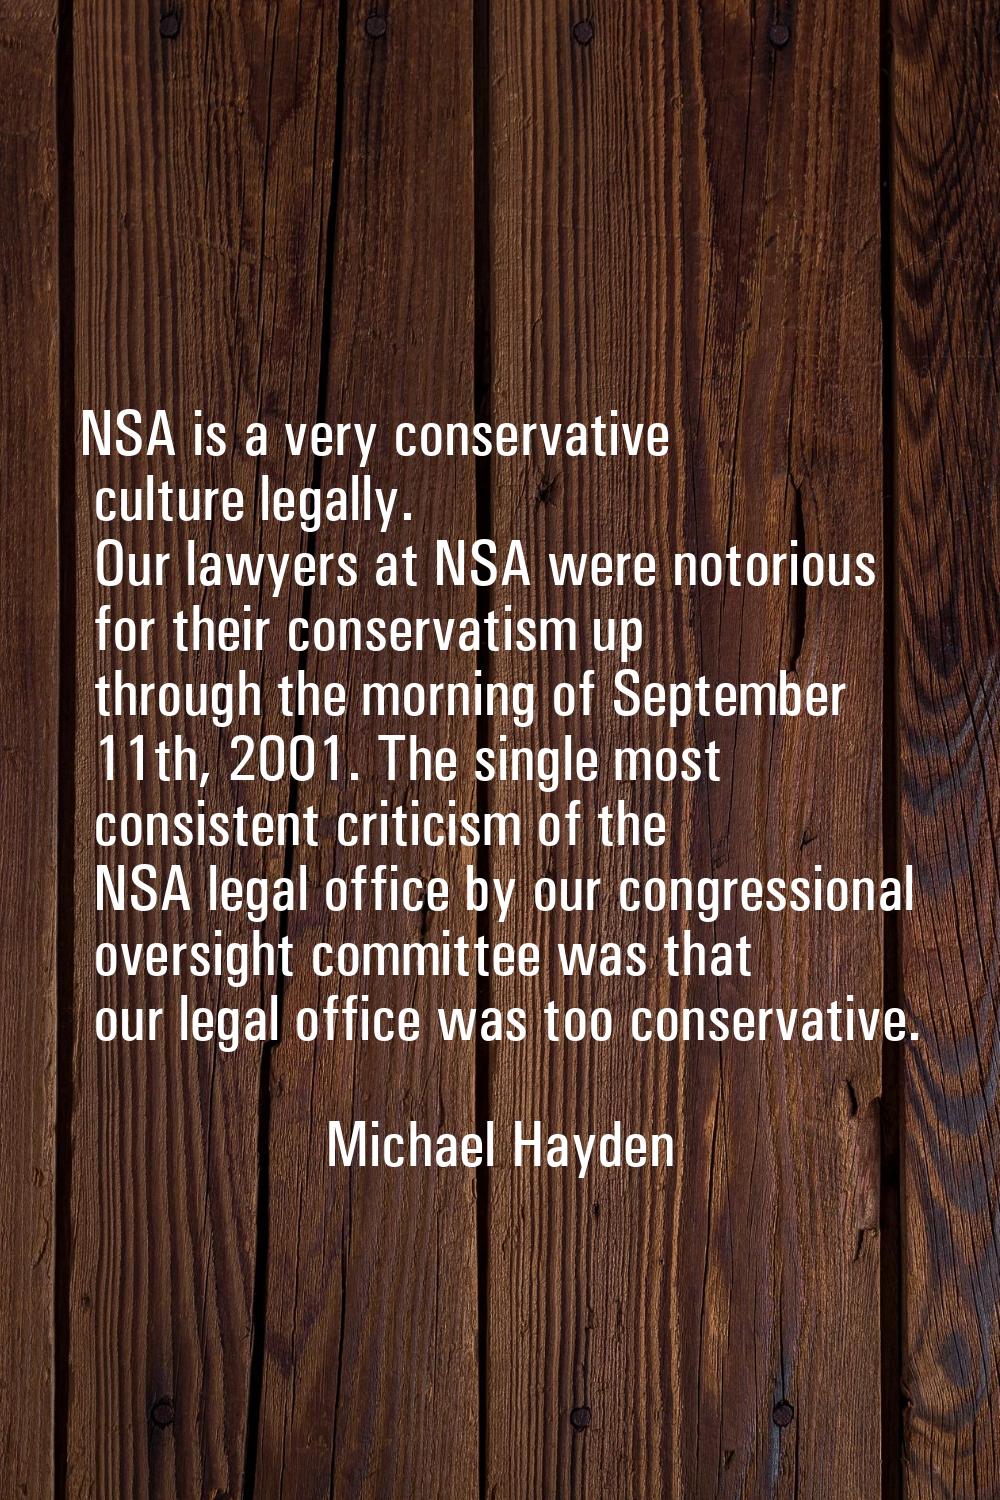 NSA is a very conservative culture legally. Our lawyers at NSA were notorious for their conservatis